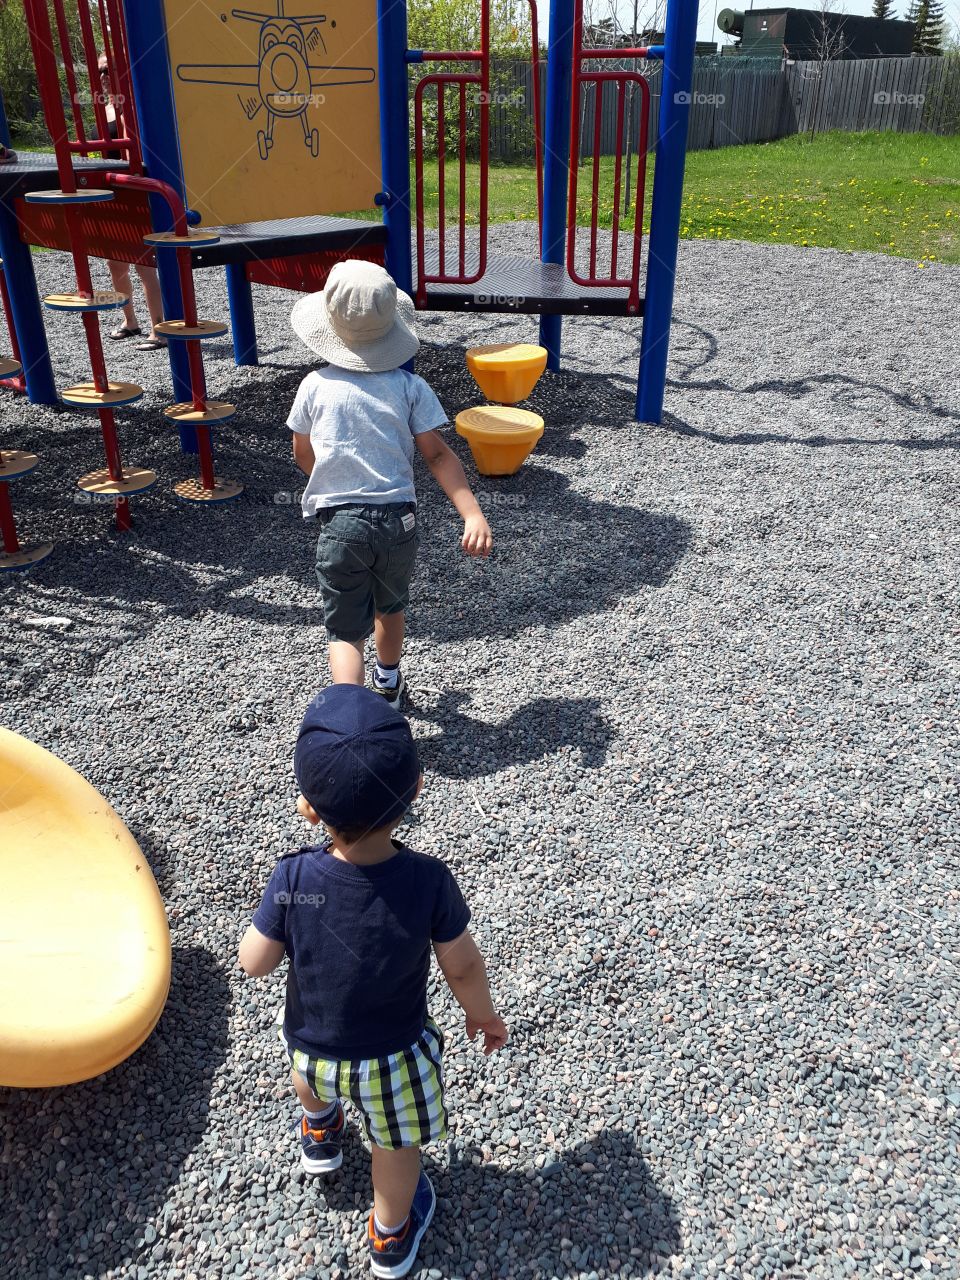 Boys playing on park equipment